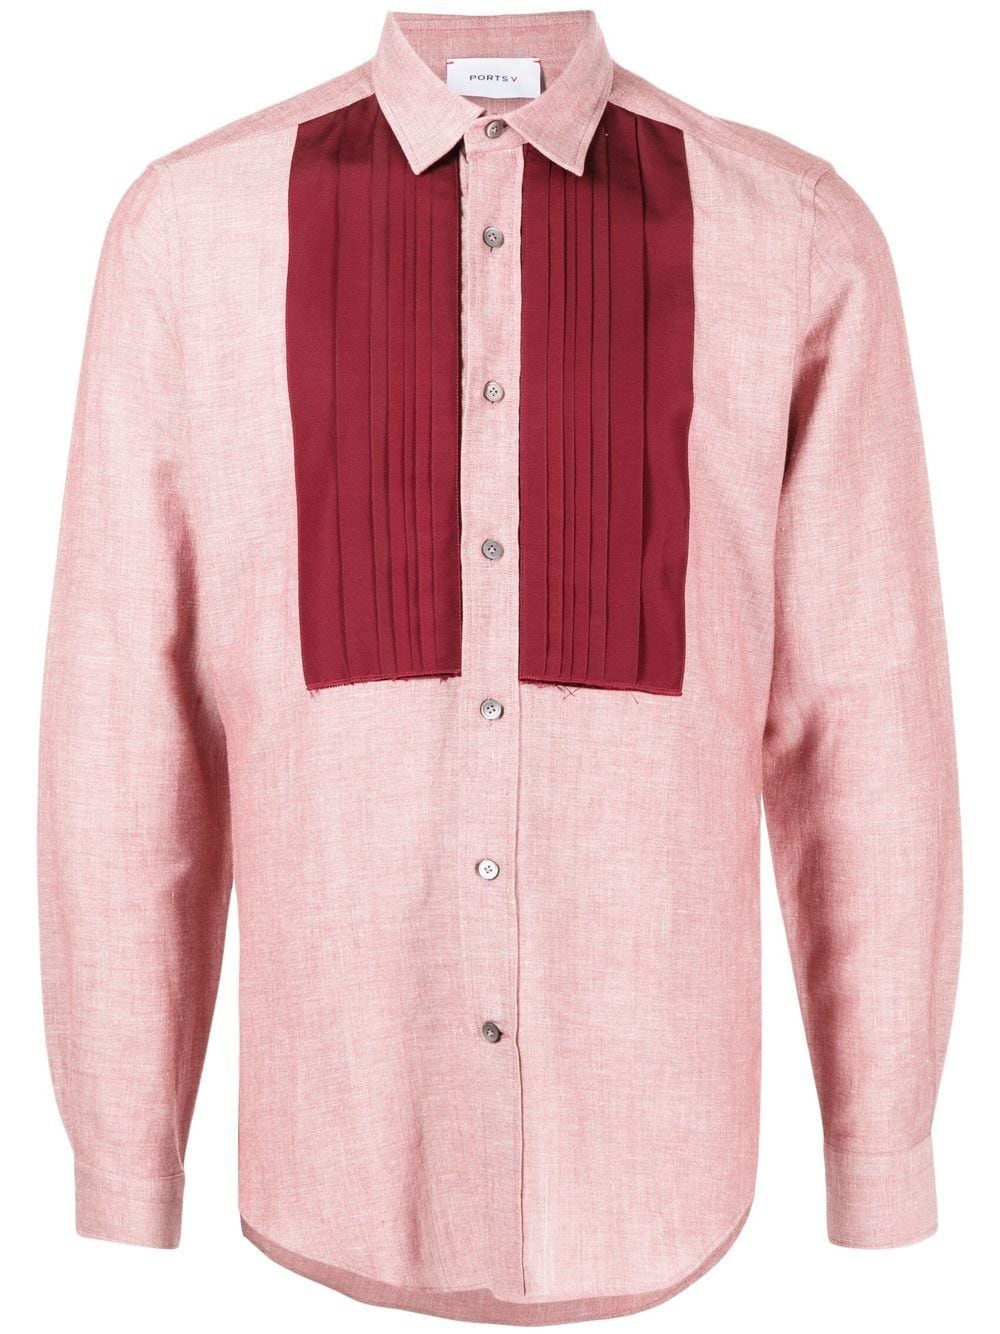 Ports V Two-tone Long-sleeve Shirt In Red